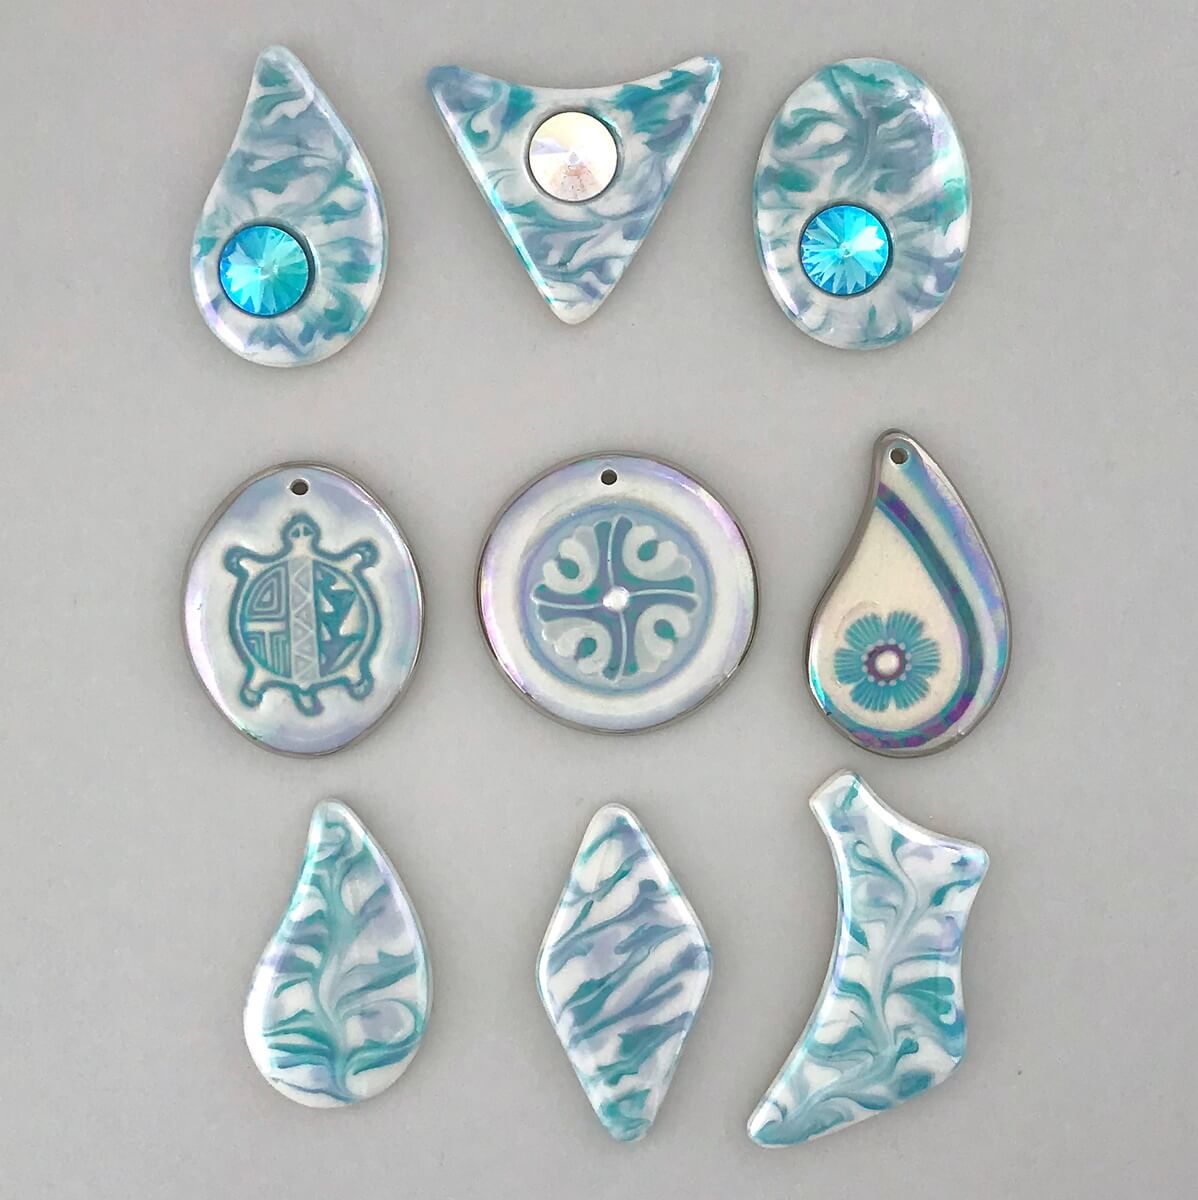 Cabochons & pendants in our new soft aqua colorway.